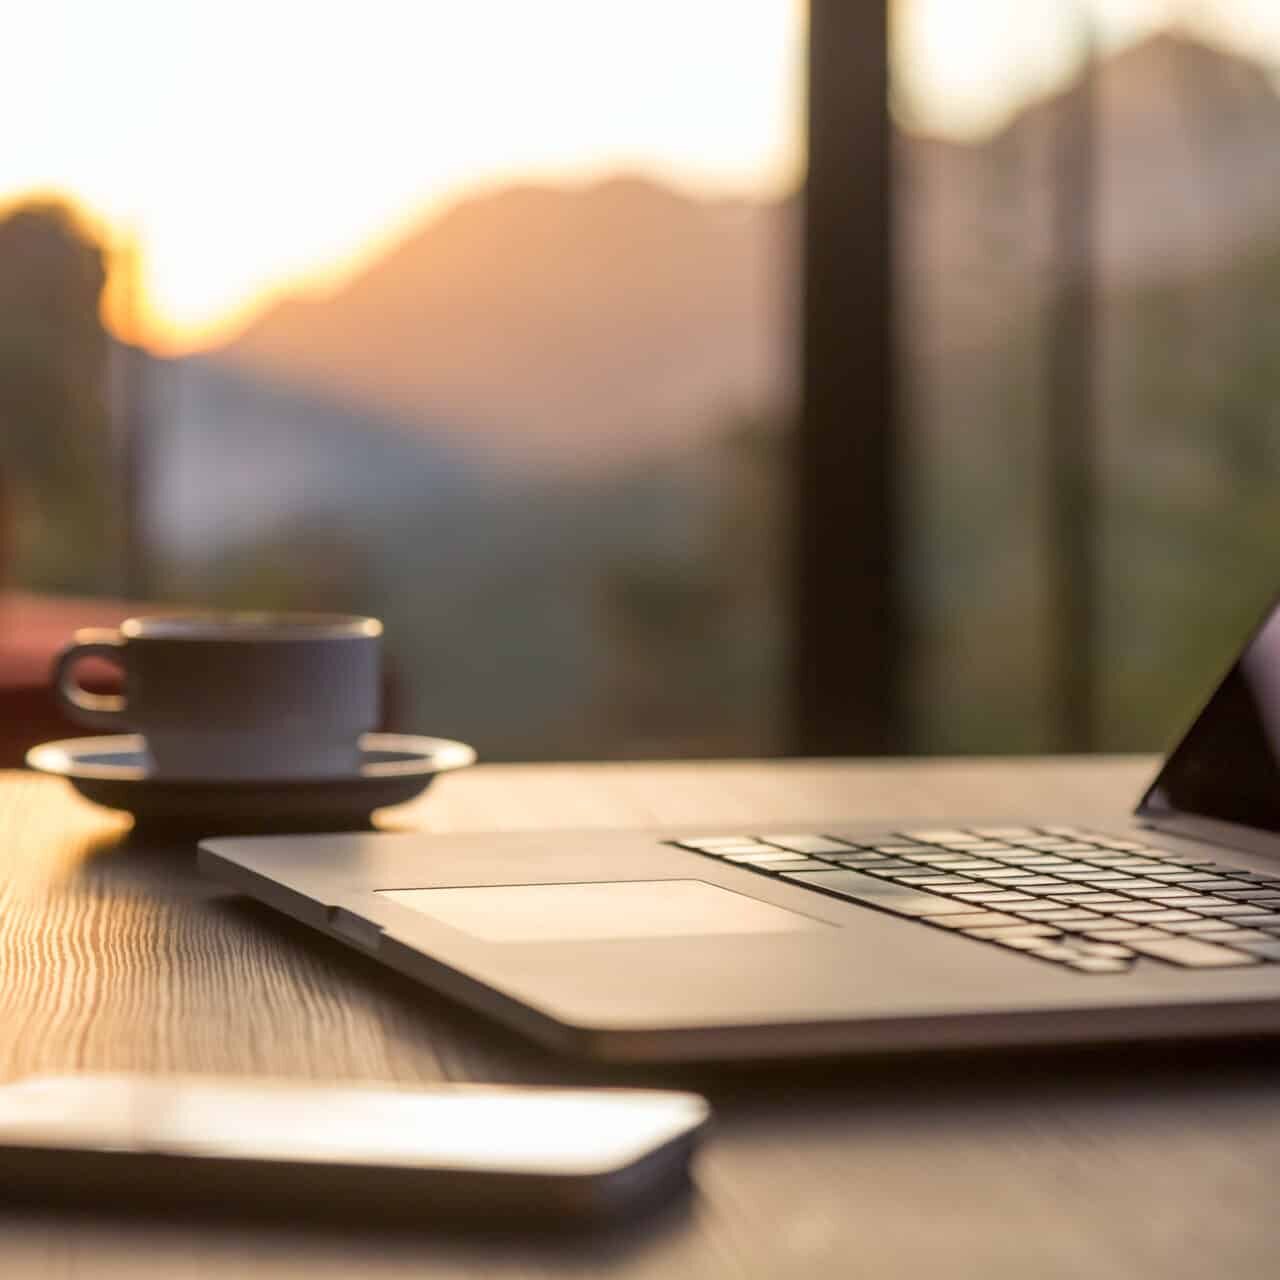 A laptop with a cup of coffee on a wooden table at sunset